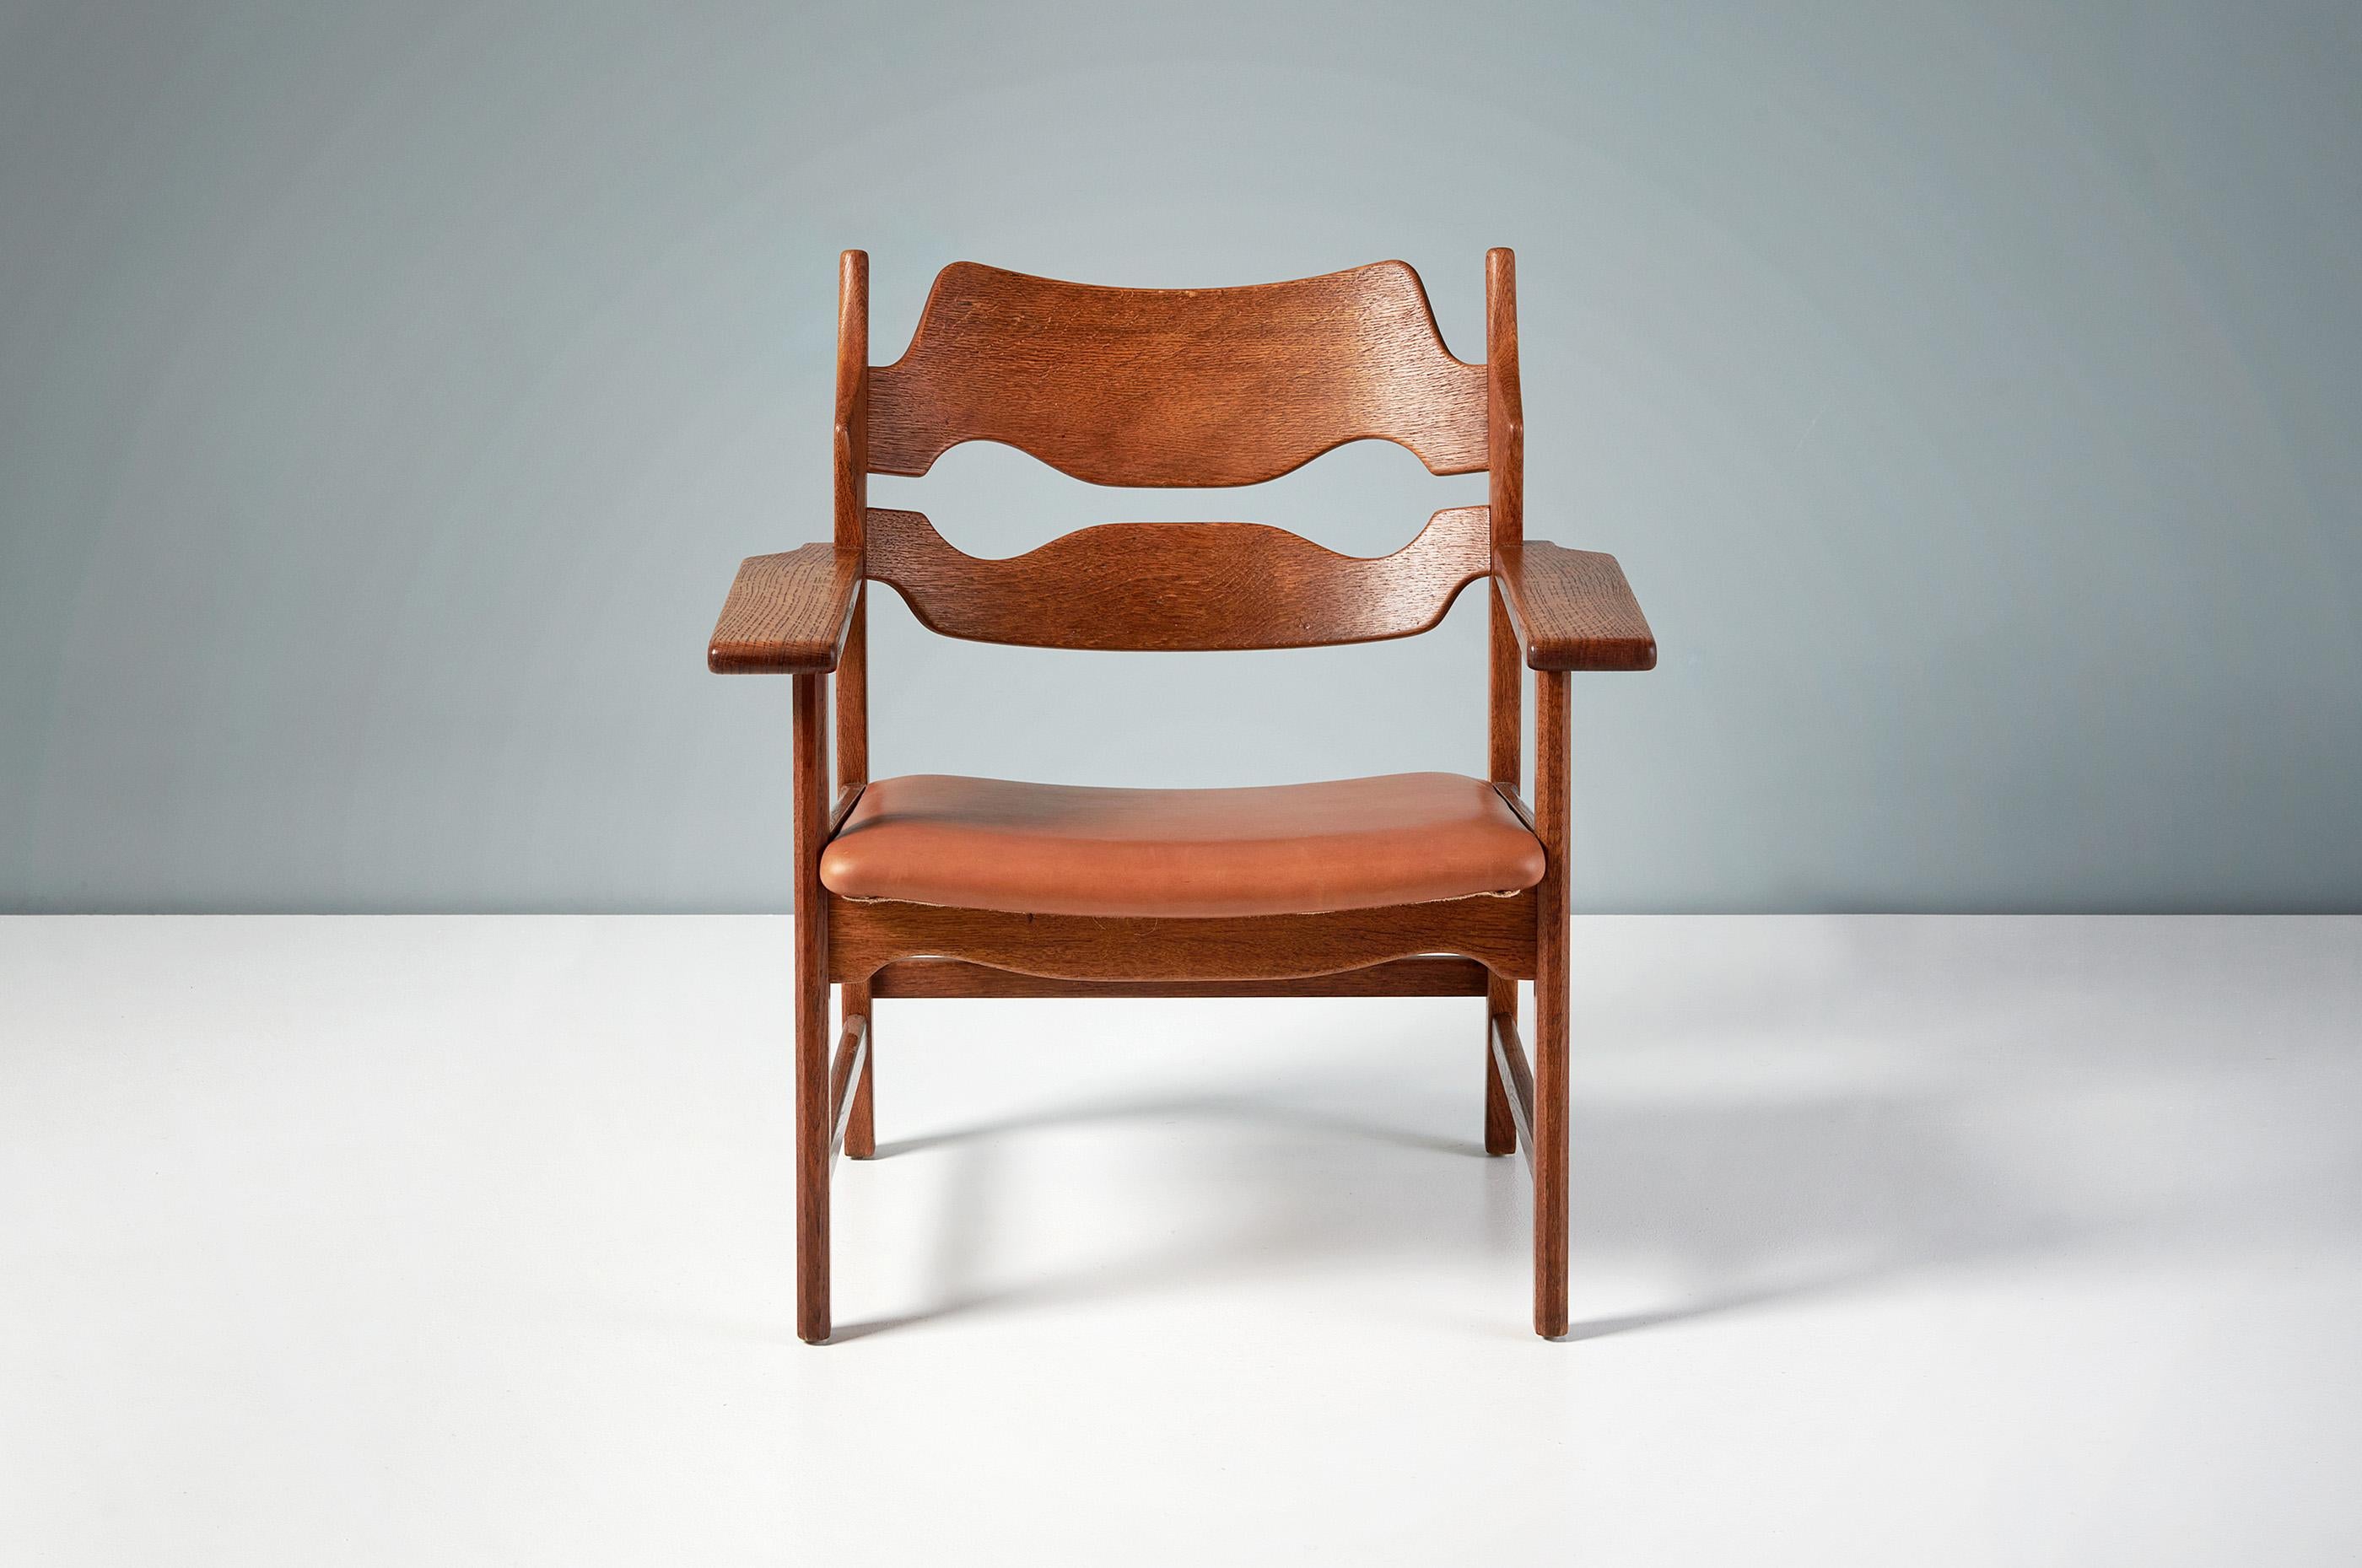 Henning Kjaernulf - Razor Blade Chair, 1960

Unique lounge chair manufactured by Nyrup Møbelfabrik, Denmark 1960. The chair features razor blade shaped carved backs and thick, wide arms all made from oiled, patinated oak. The seat has been